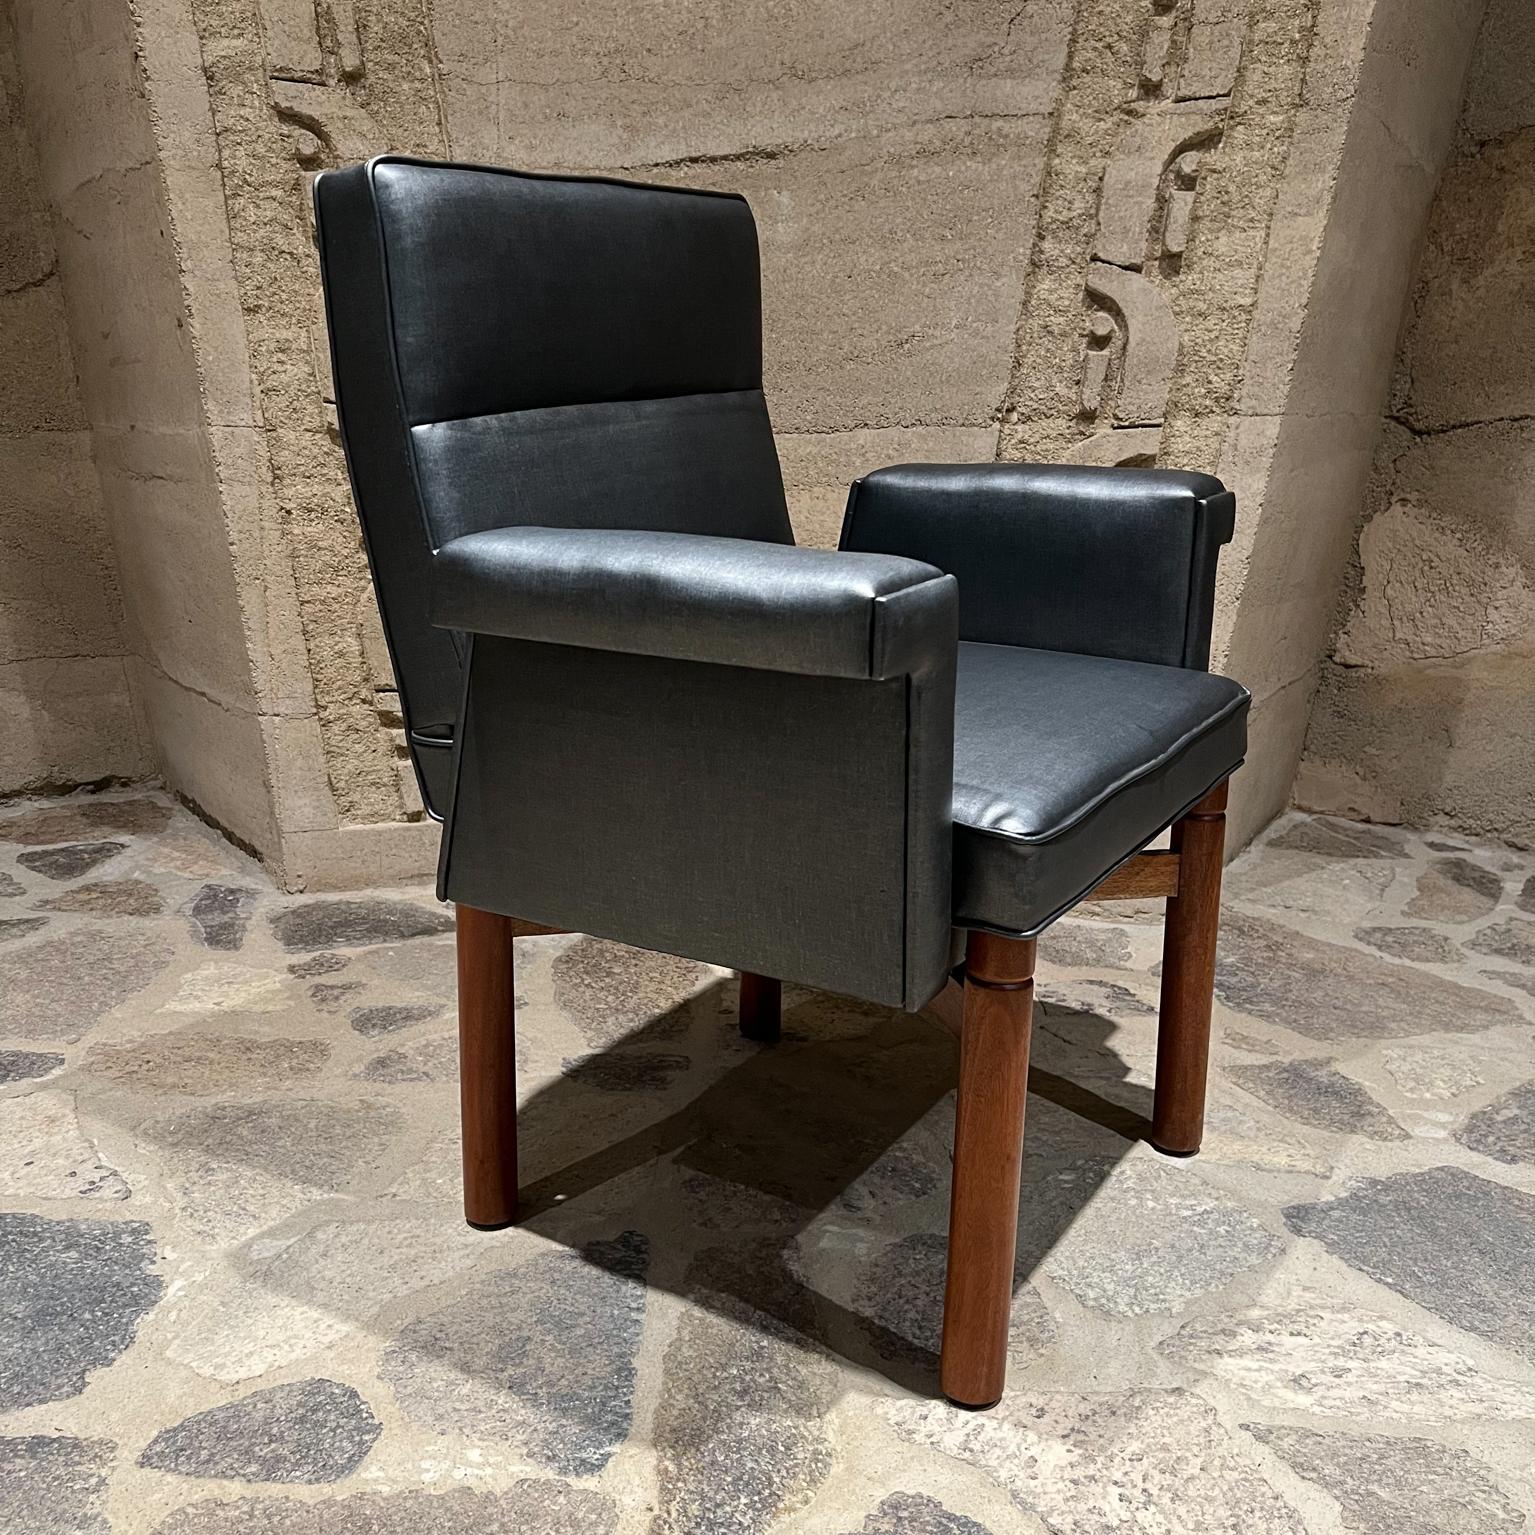 Set of Four Fabulous Modern Gray Armchairs Floating Wood IRGSA Mexico City In Good Condition For Sale In Chula Vista, CA